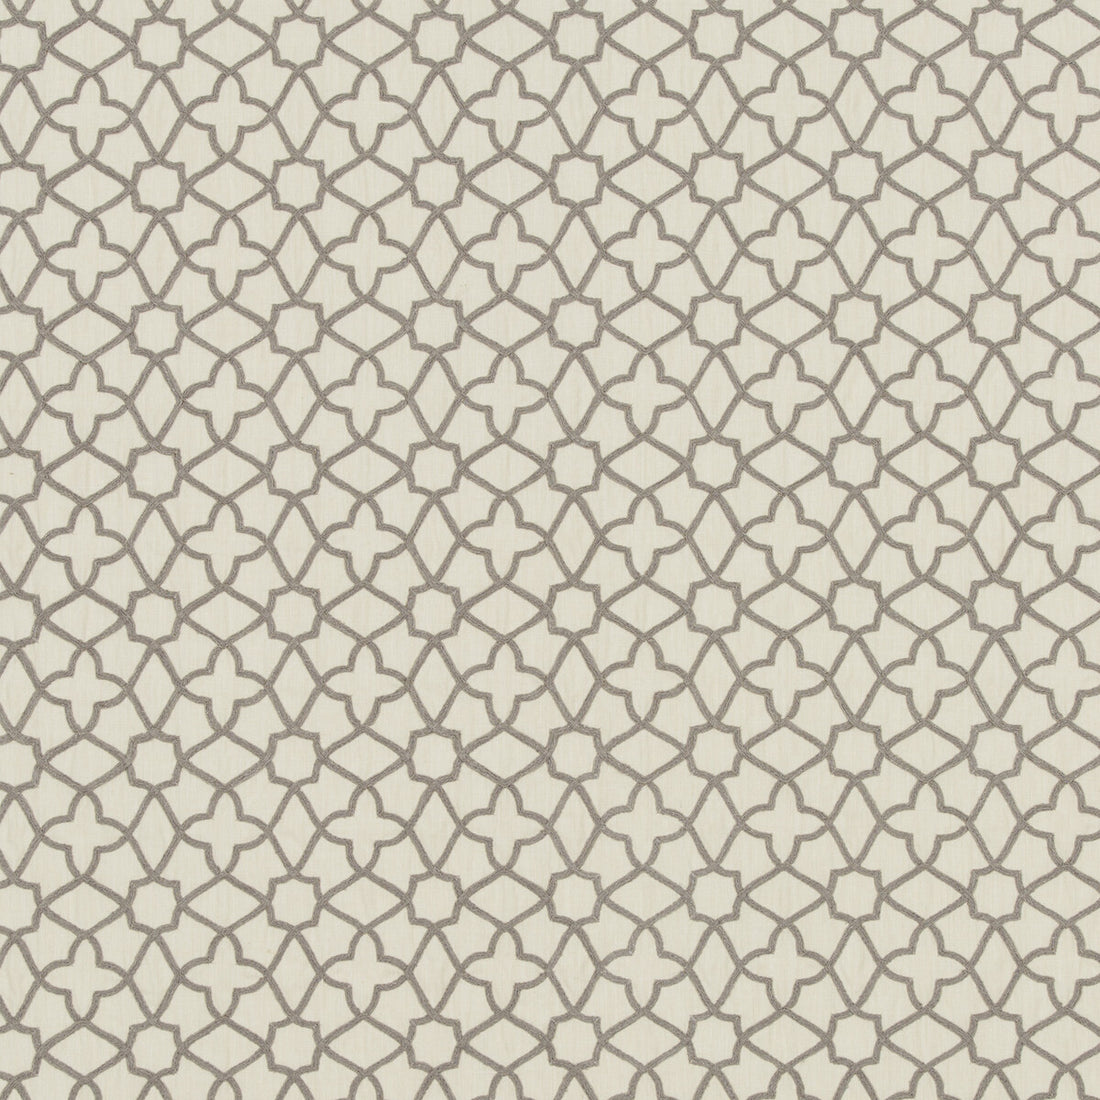 Marmora fabric in quartz color - pattern BF10719.1.0 - by G P &amp; J Baker in the East To West collection